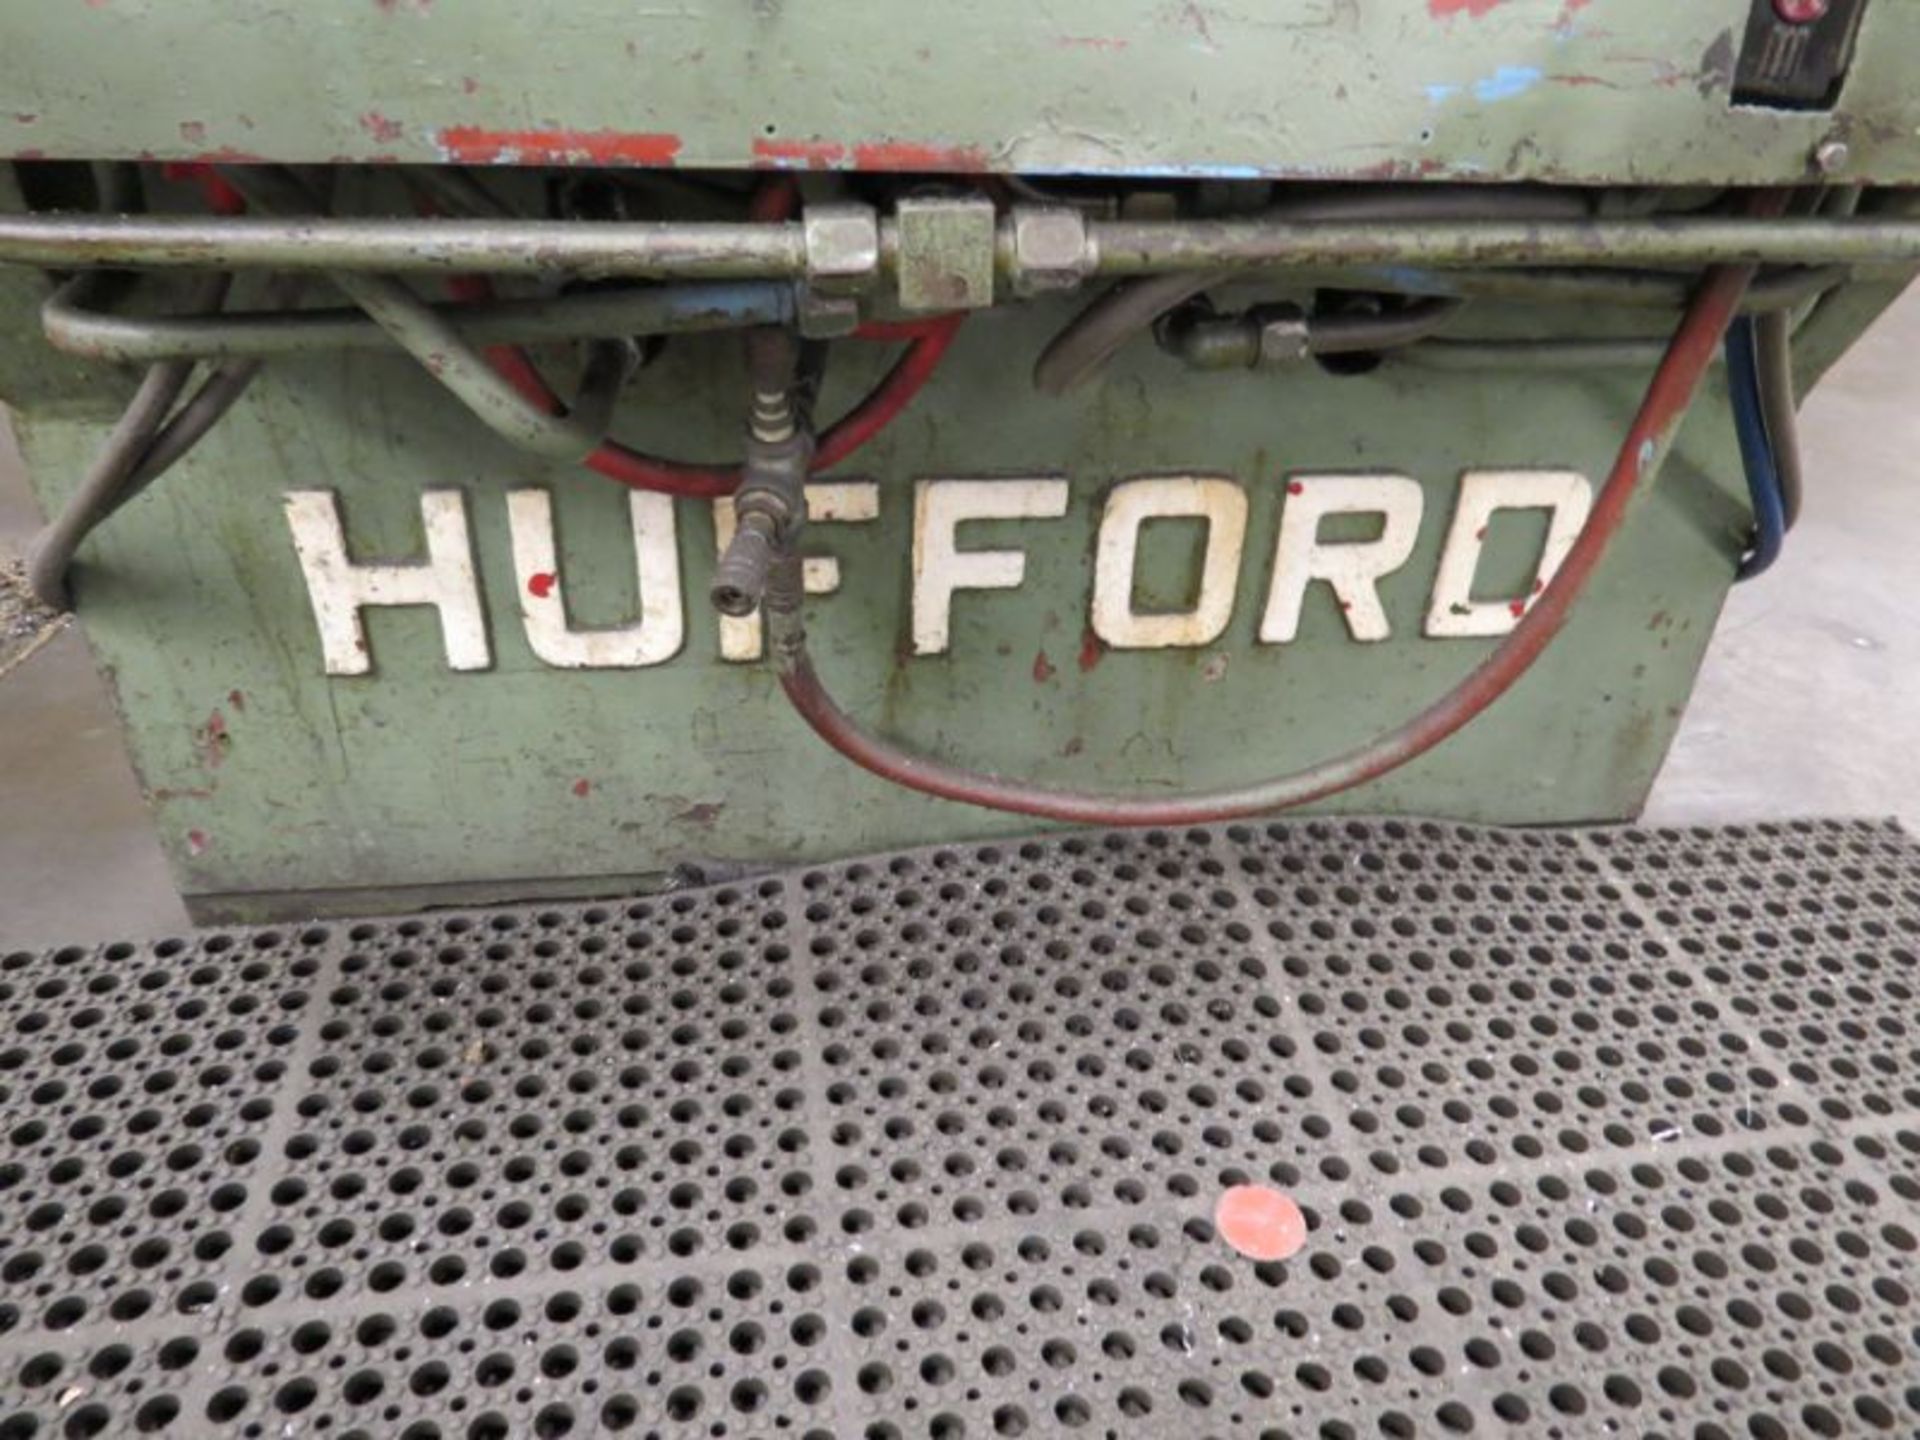 Hufford A -5 Stretch Forming Machine, s/n 56 - Image 6 of 9